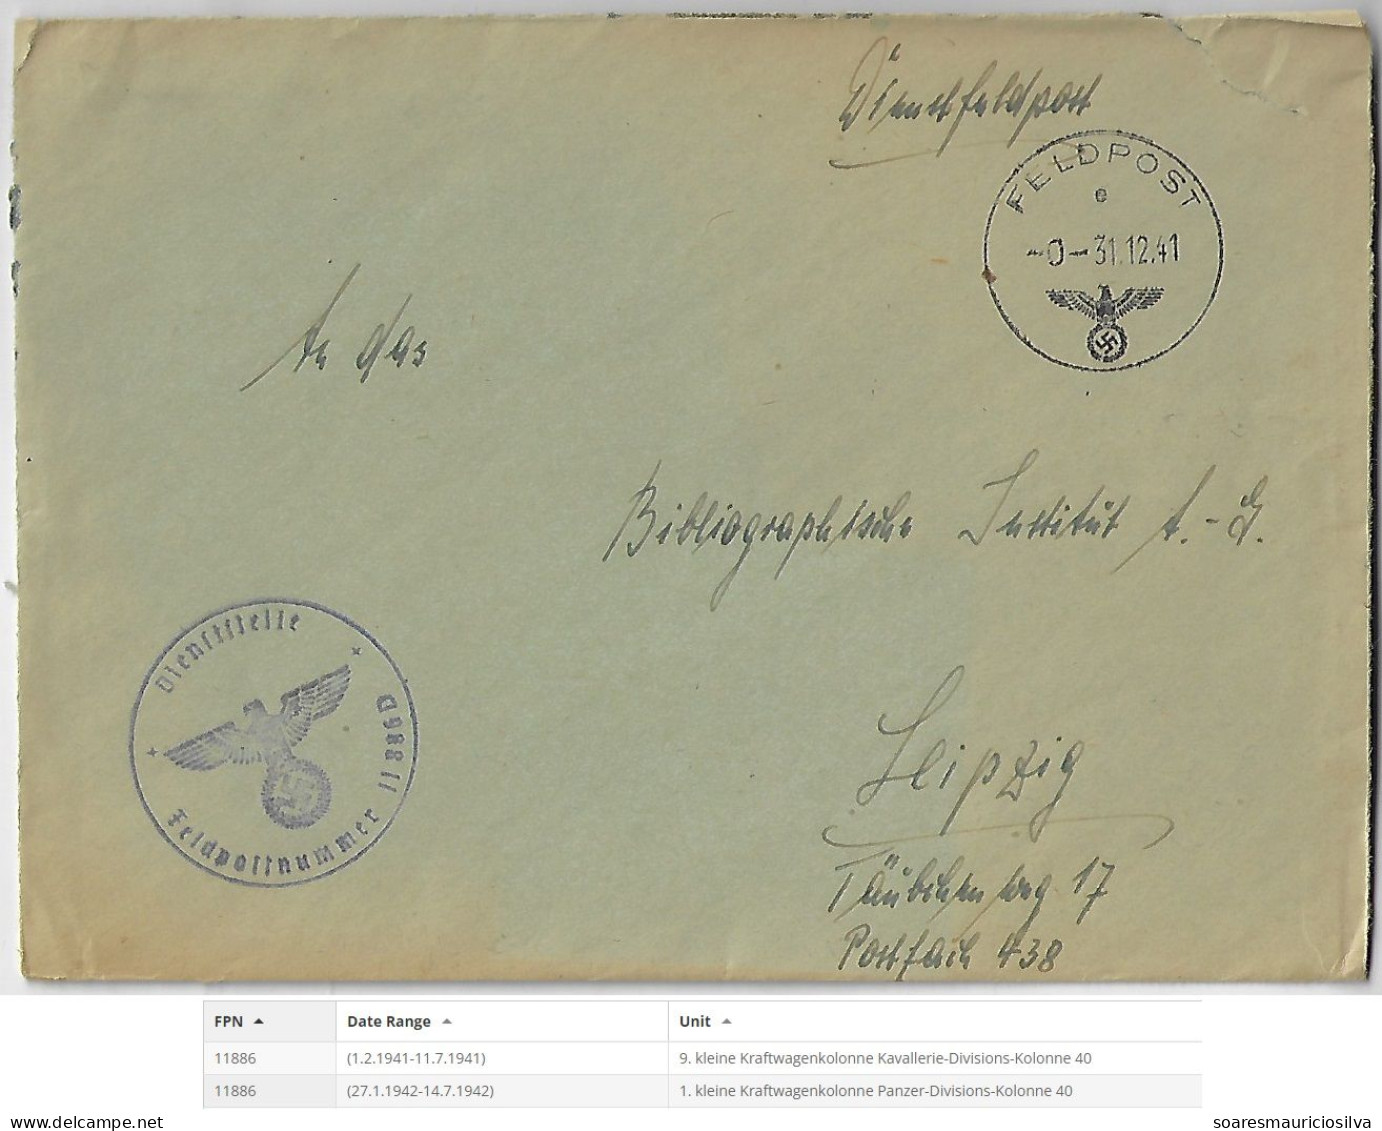 Germany 1941 Feldpost Cover Cancel Eagle Swastika Number 11886 1st Small Motor Vehicle Column Panzer Division Column 40 - Feldpost 2. Weltkrieg